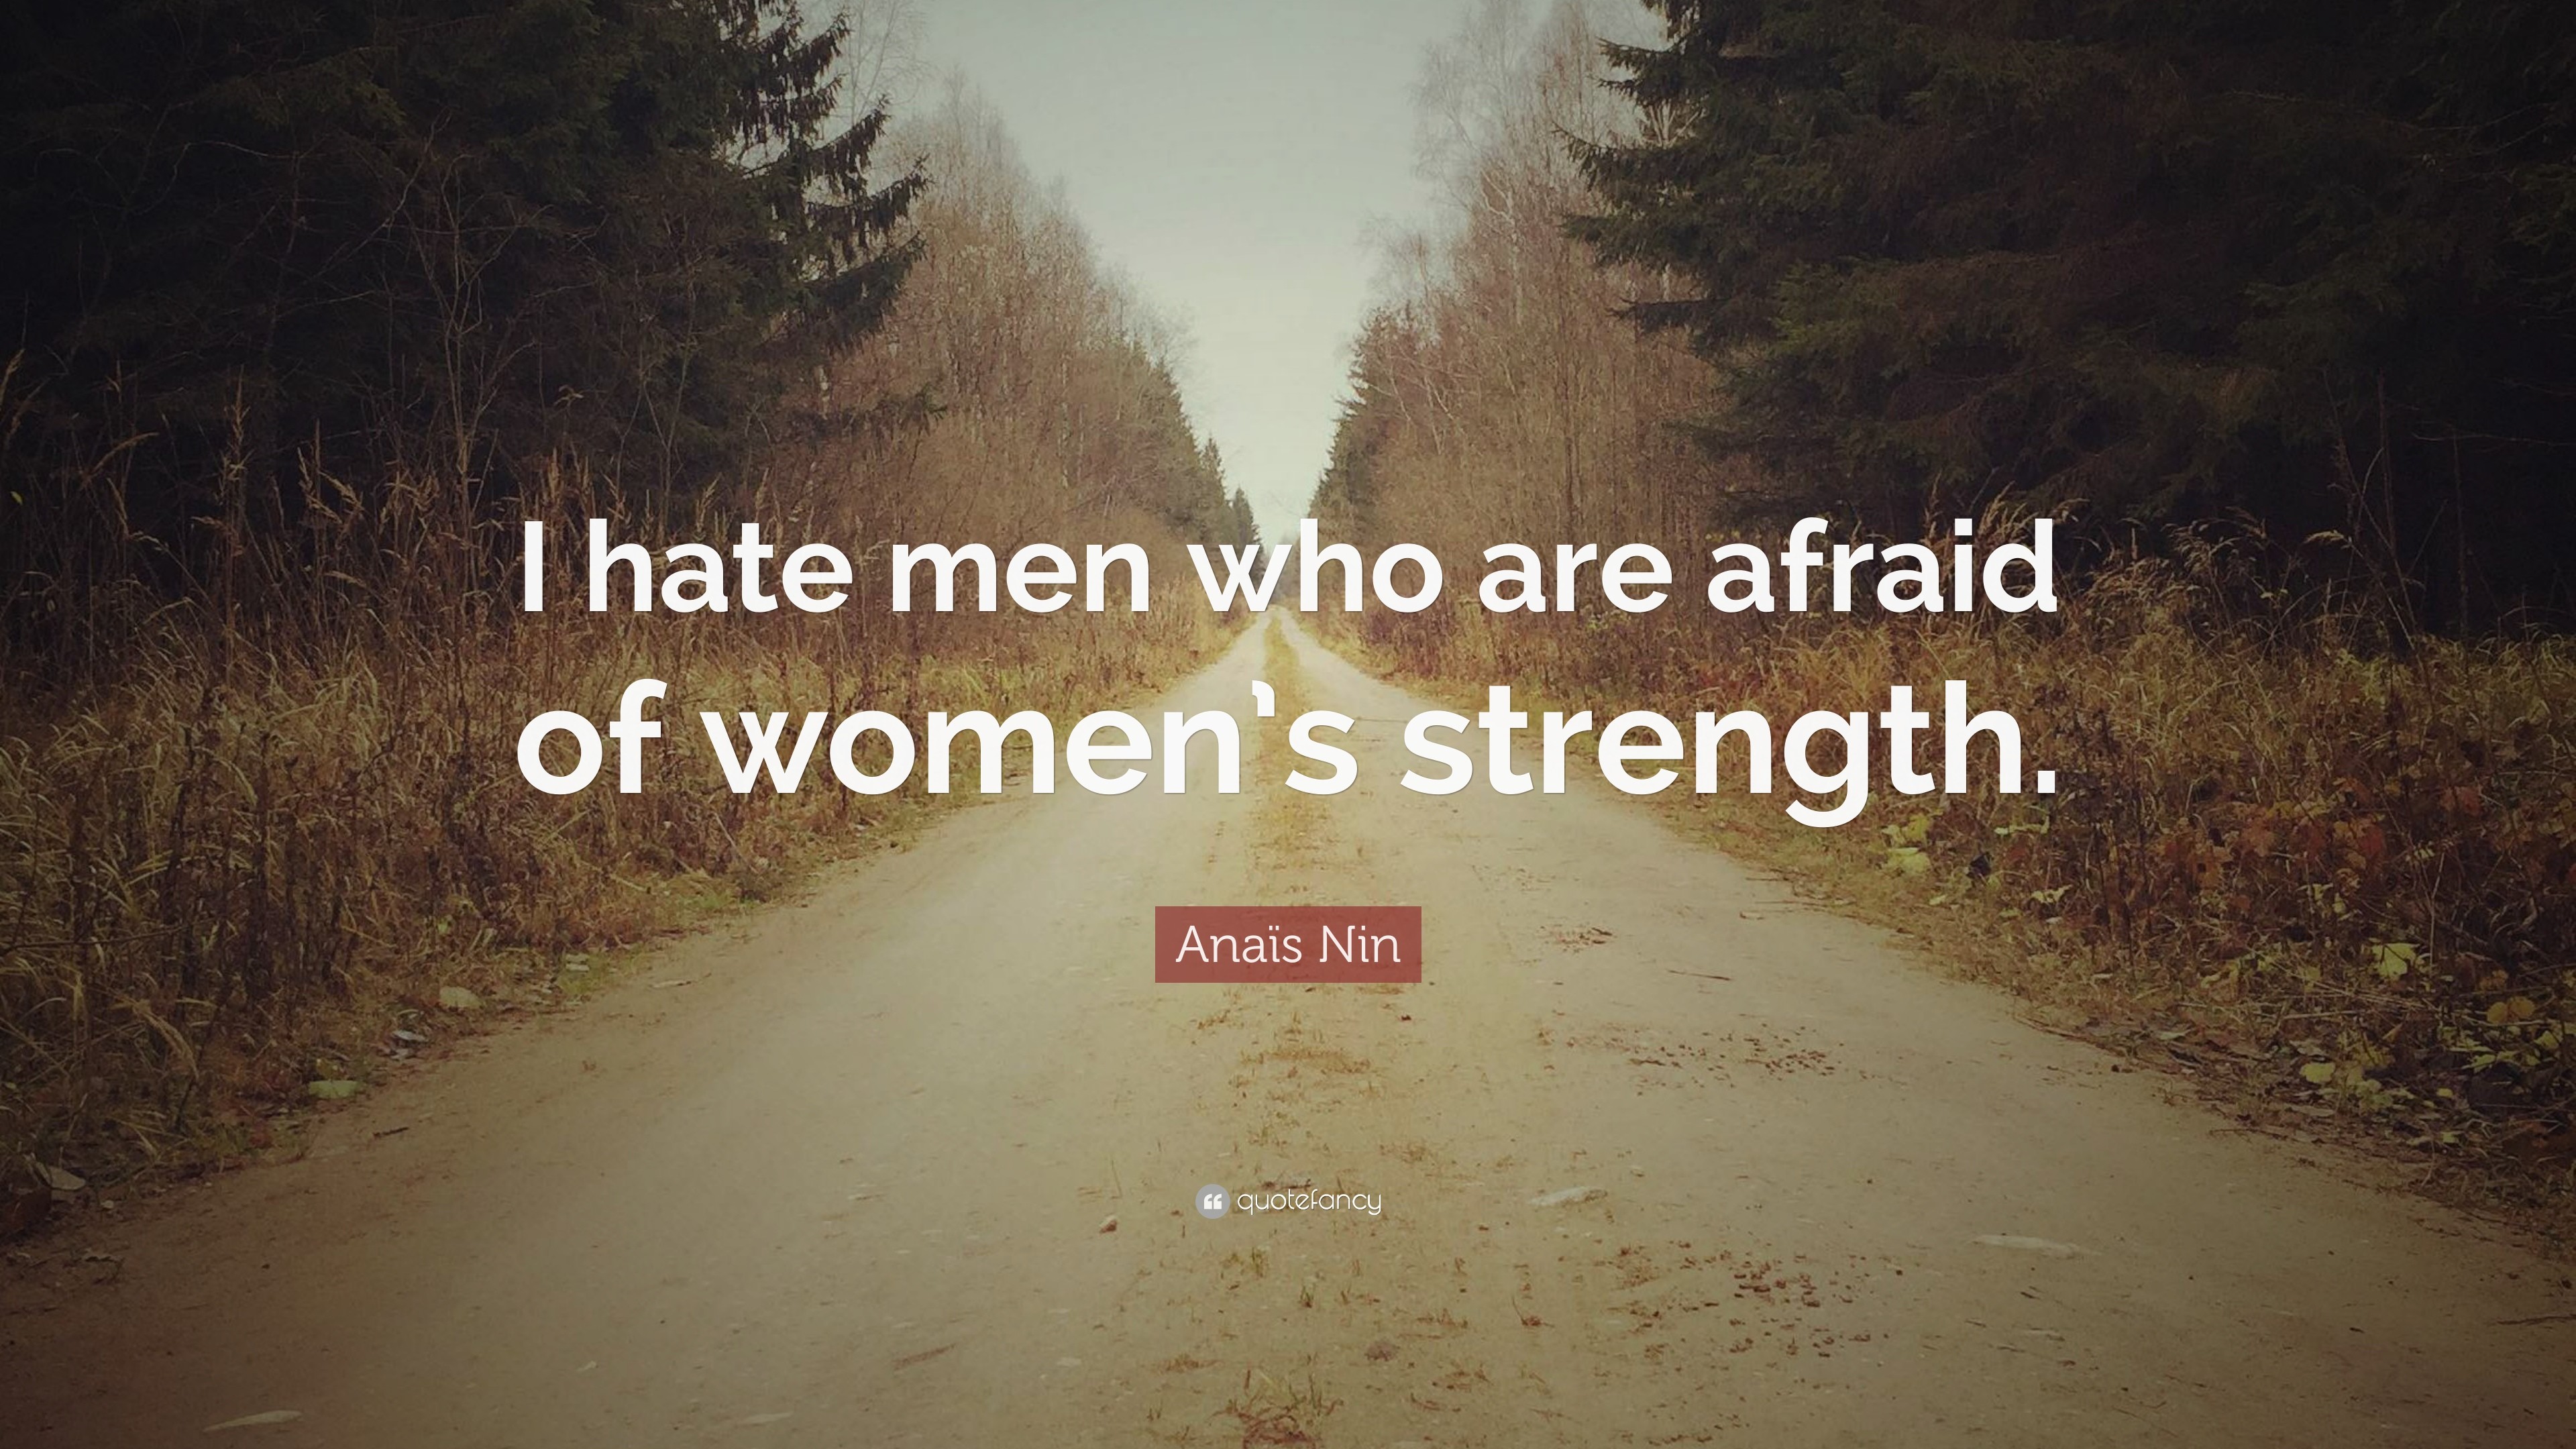 3840x2160 AnaÃ¯s Nin Quote: “I hate men who are afraid of women's strength.”